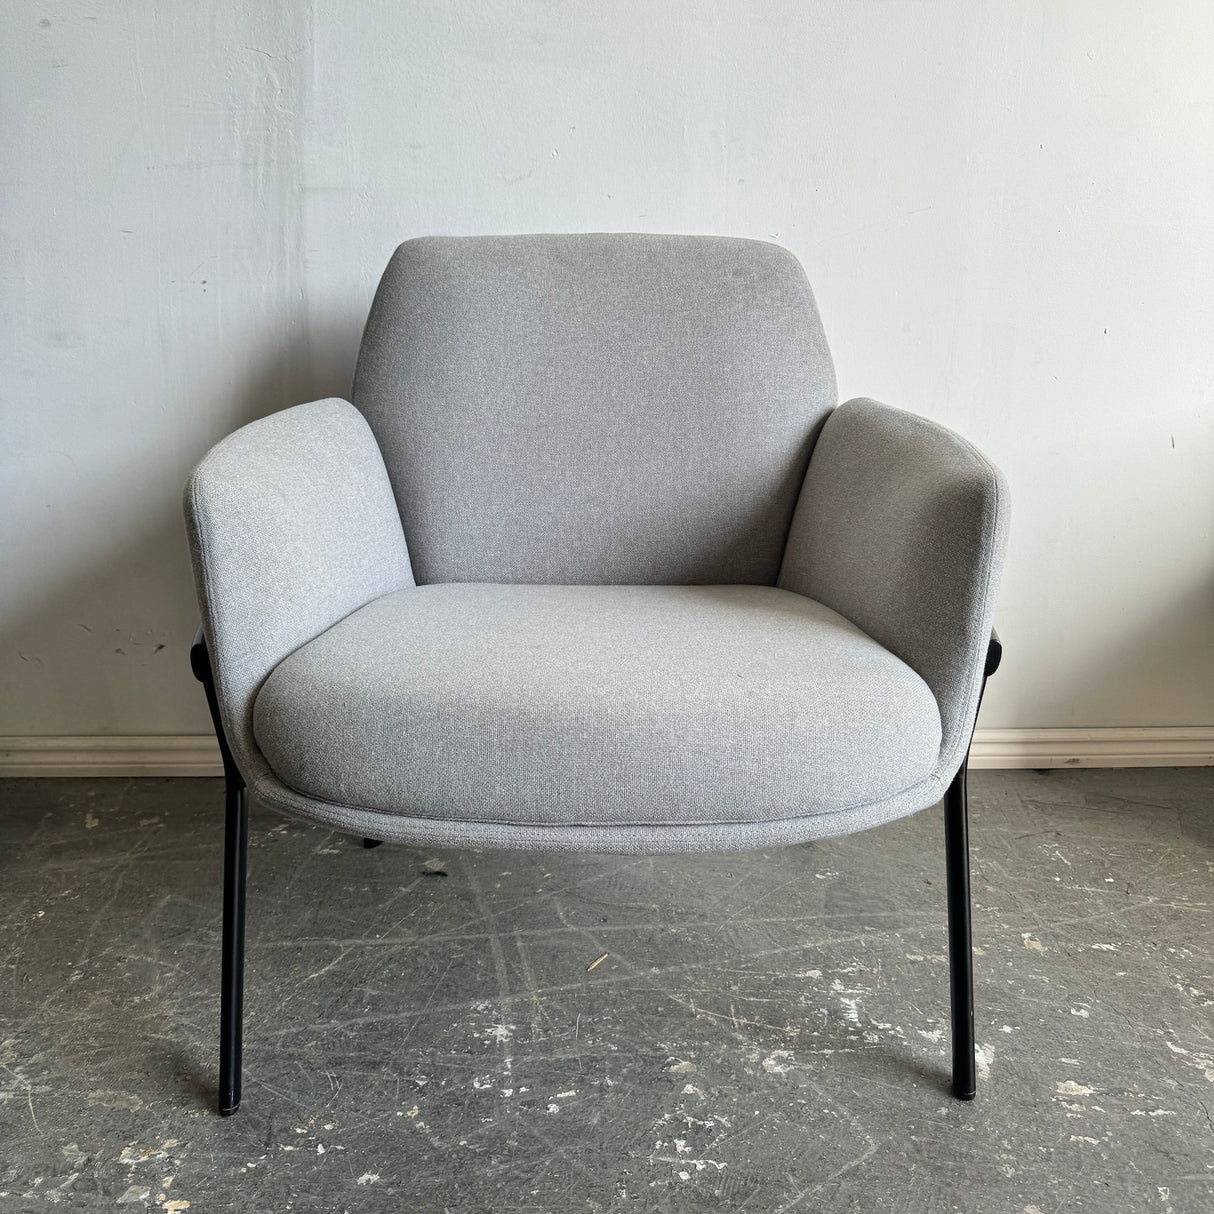 Poppy Lounge chair by Patricia Urquiola for Haworth